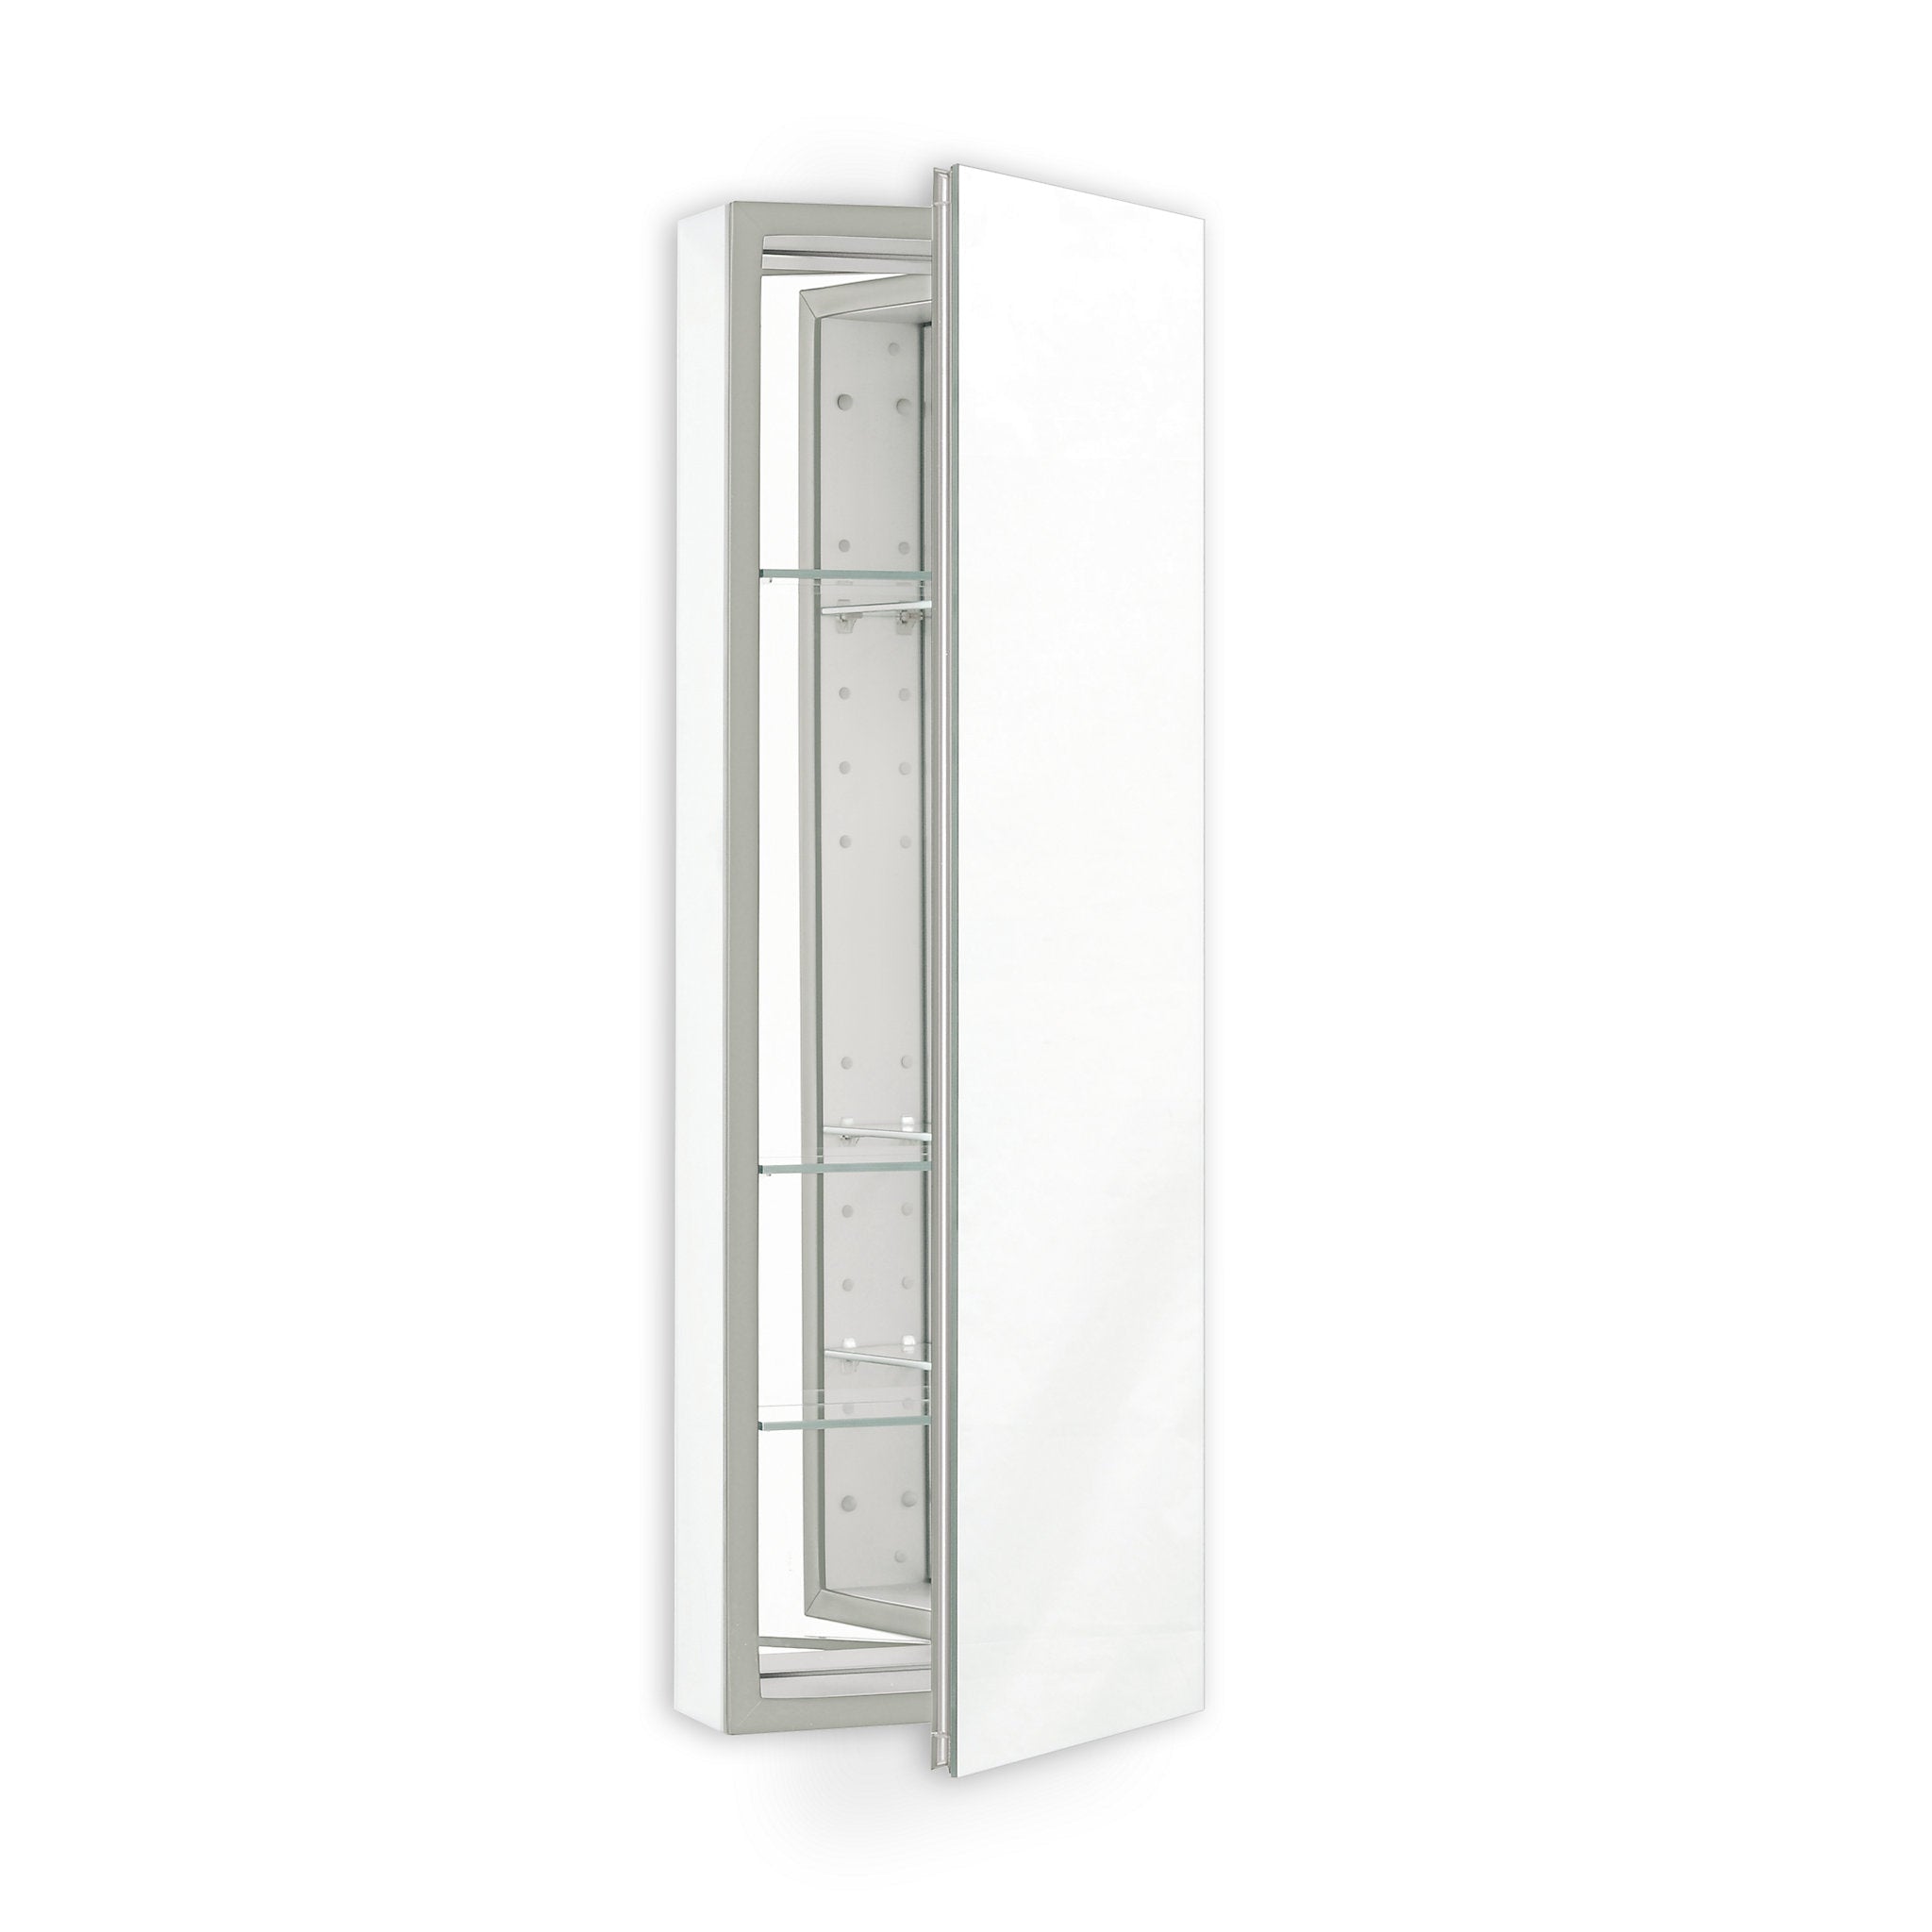 robern PLM1640W PL Series Cabinet, 15-1/4" x 39-3/8" x 4", Flat Top, Polished Edge, Non-Handed (Reversible), White Interior, Non-Electric - image 1 of 1